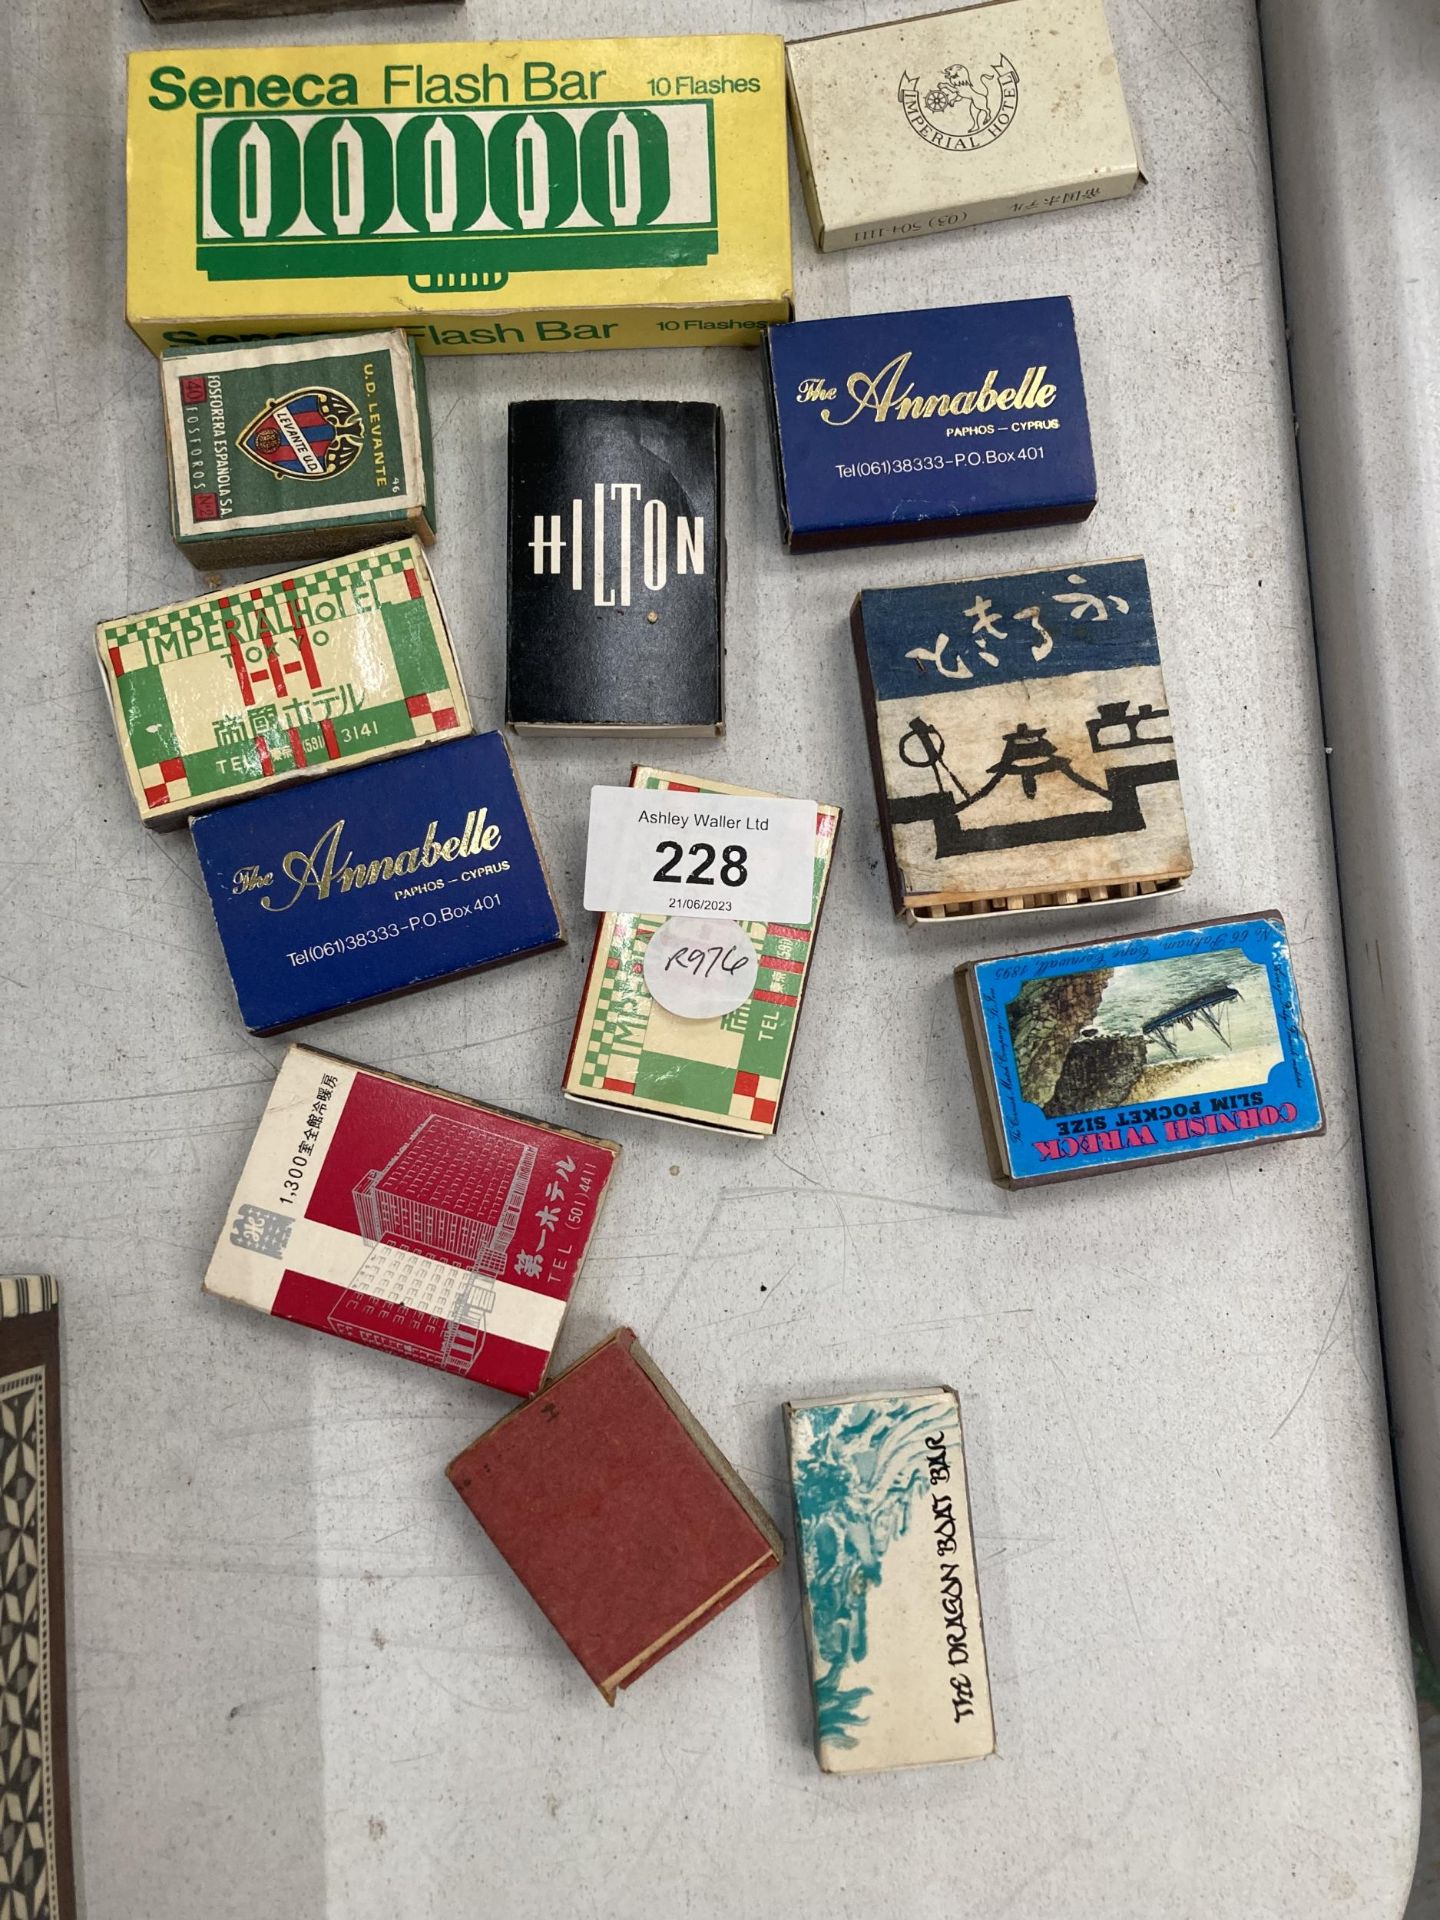 A VINTAGE LOT OF ITEMS, TINS, PHOTOS AND MATCHSTICK BOXES - Image 4 of 4